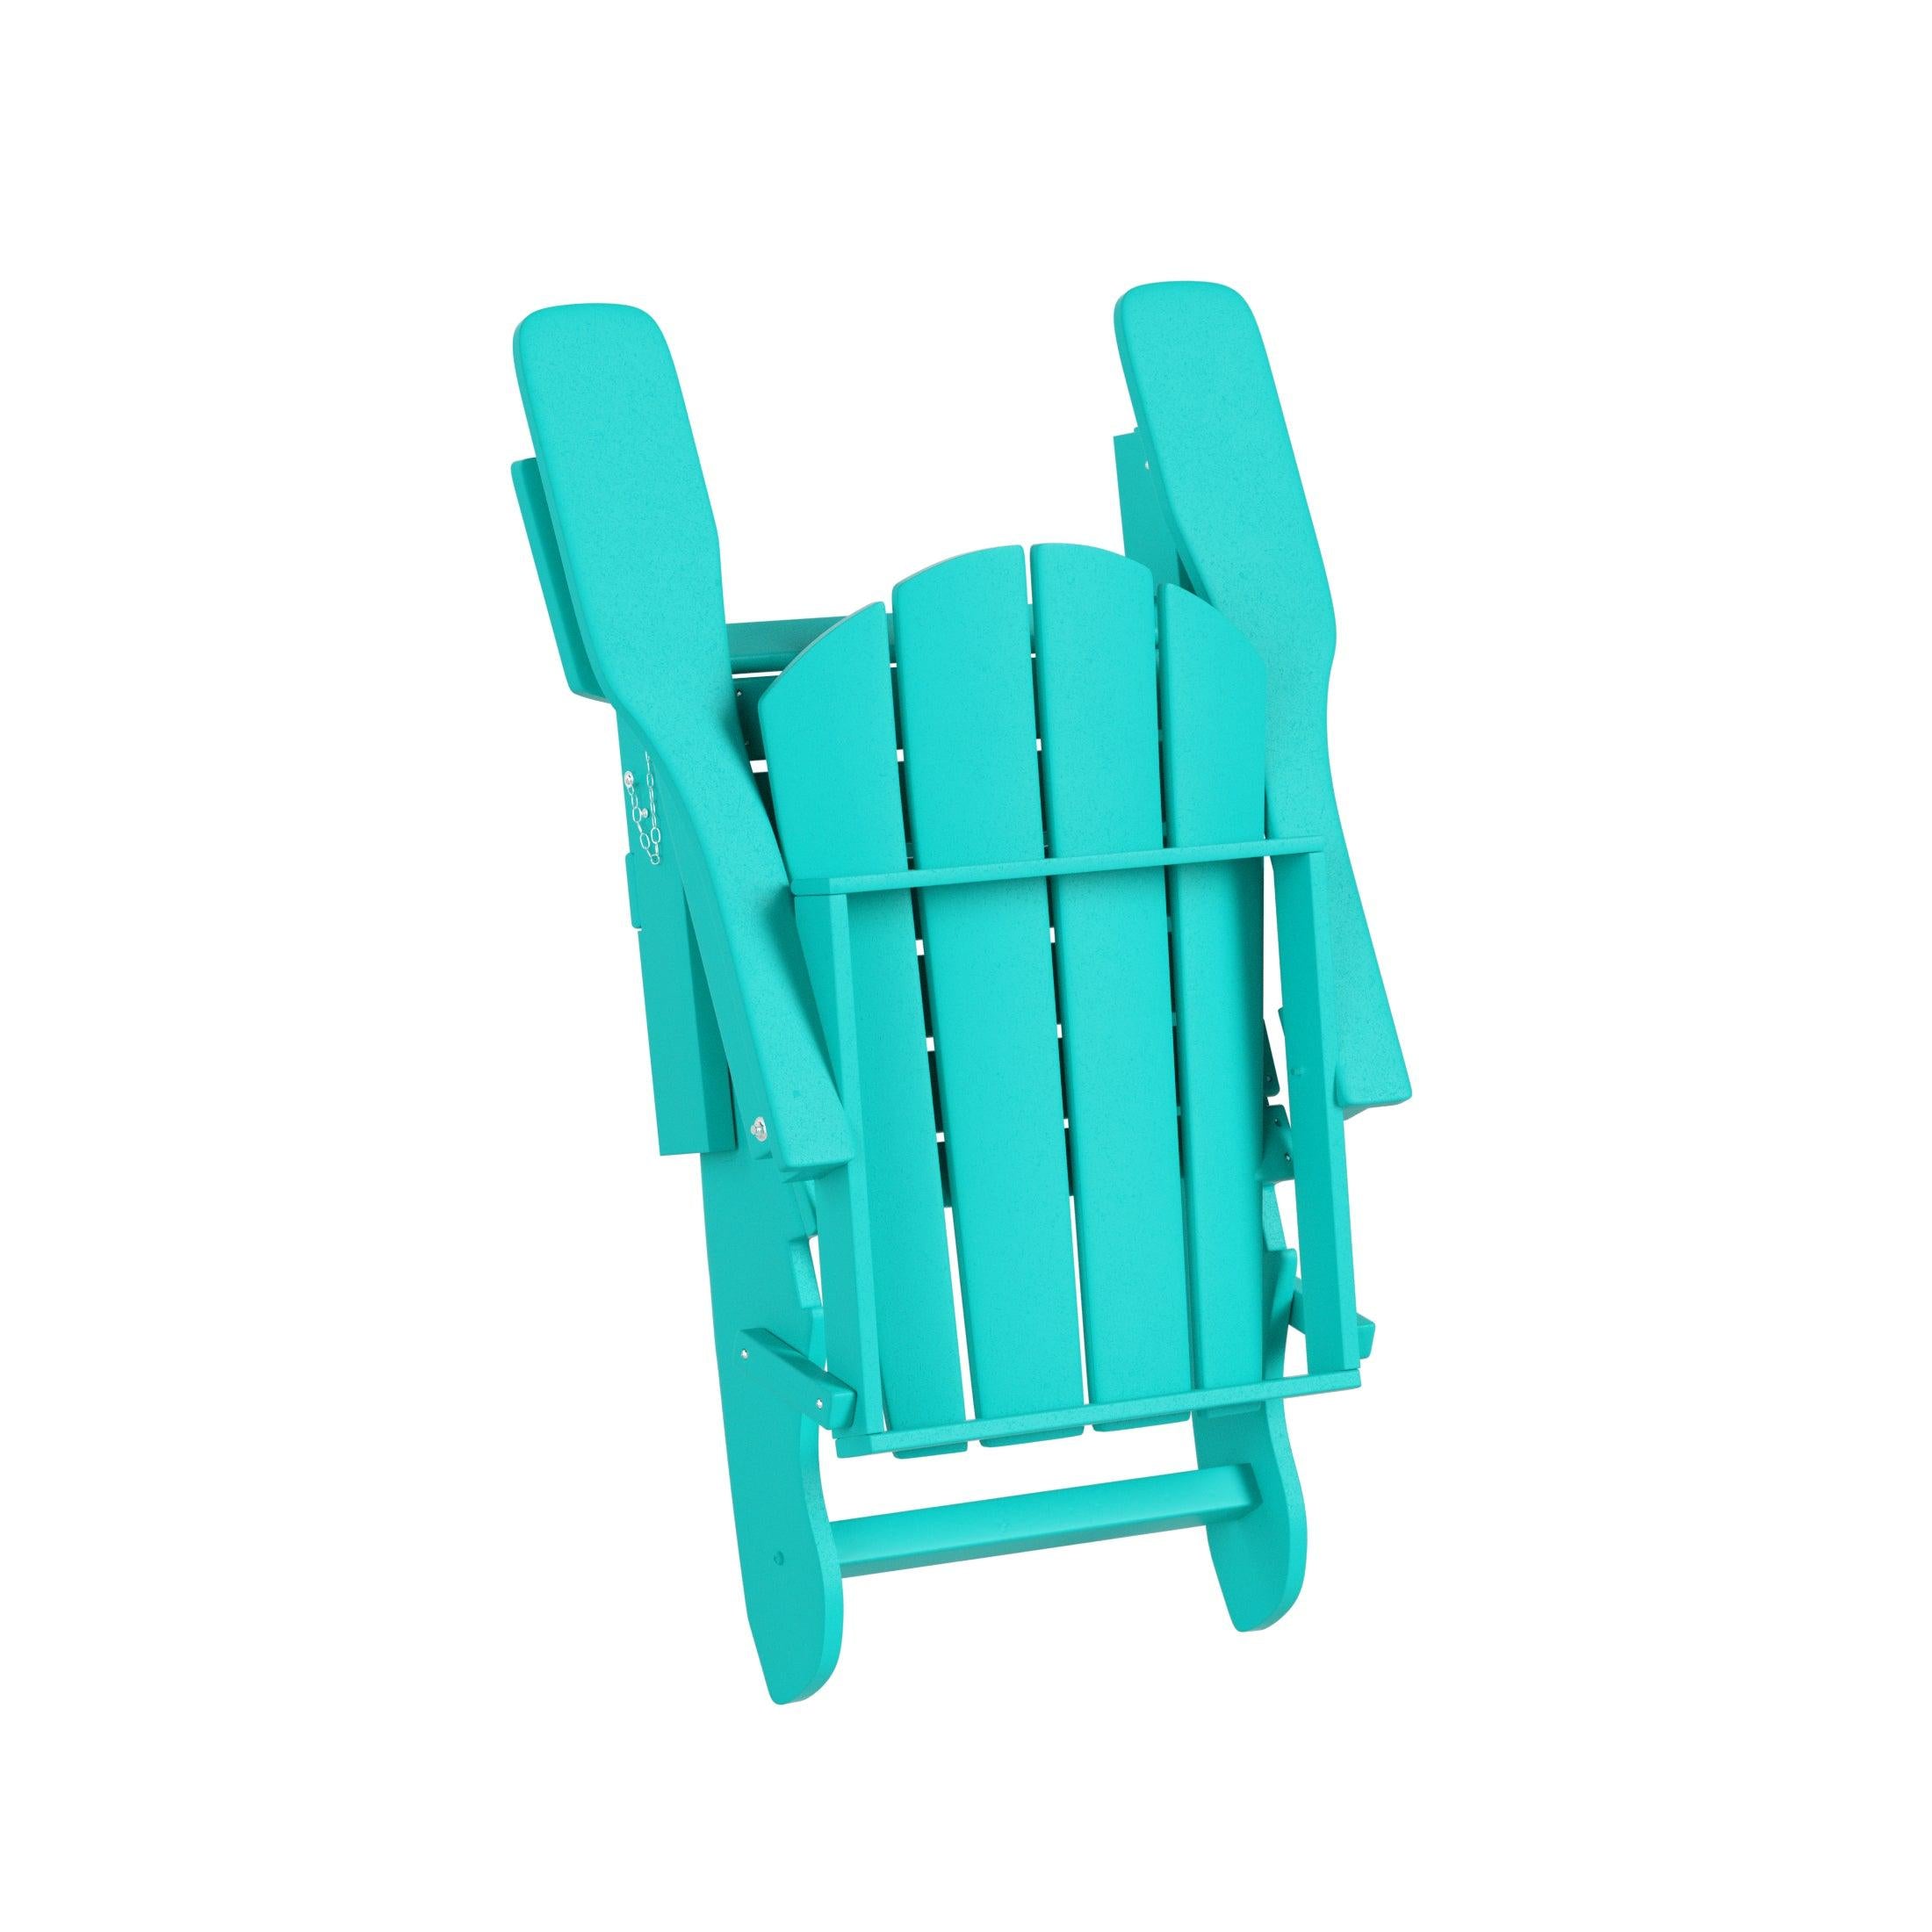 Paradise 2-Piece Set Classic Folding Adirondack Chair with Outdoor Side Table - Costaelm